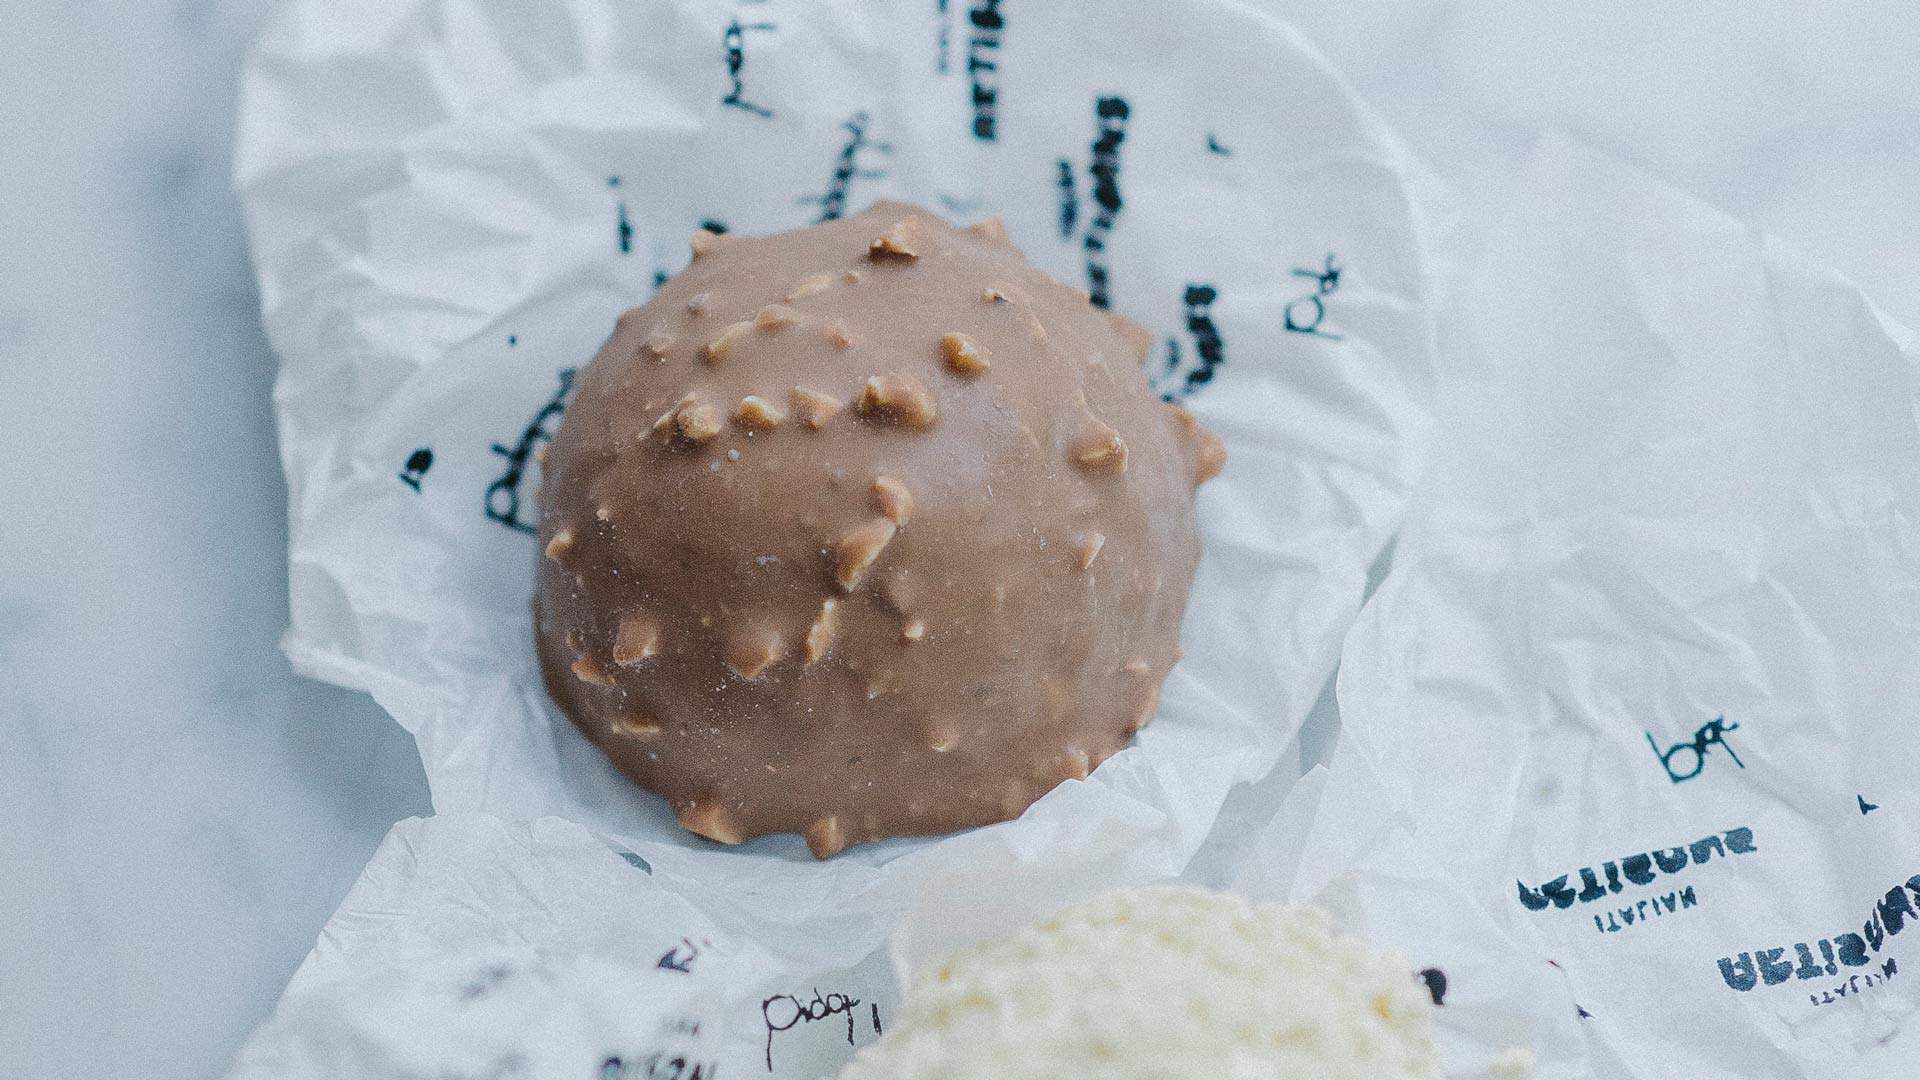 Pidapipo Is Serving Up $7 Gelato Truffles for Just One Week